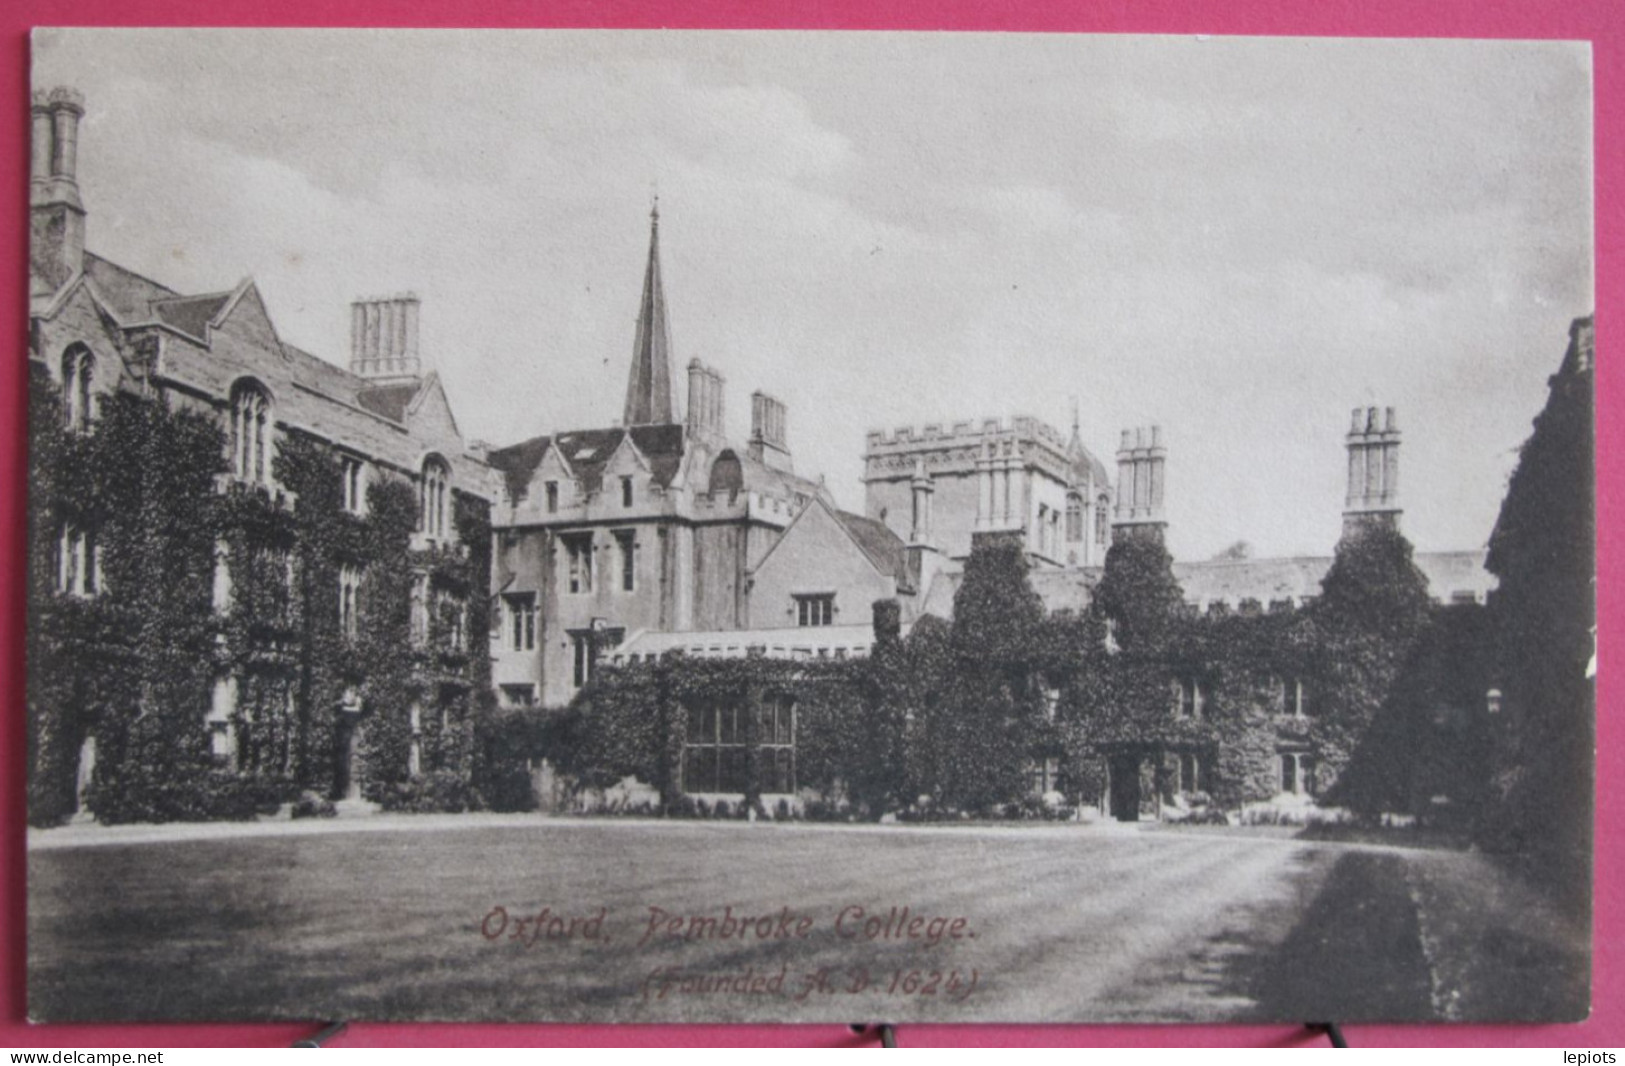 Angleterre - Oxford - Pembroke College Founded A. D. 1624 - Oxford